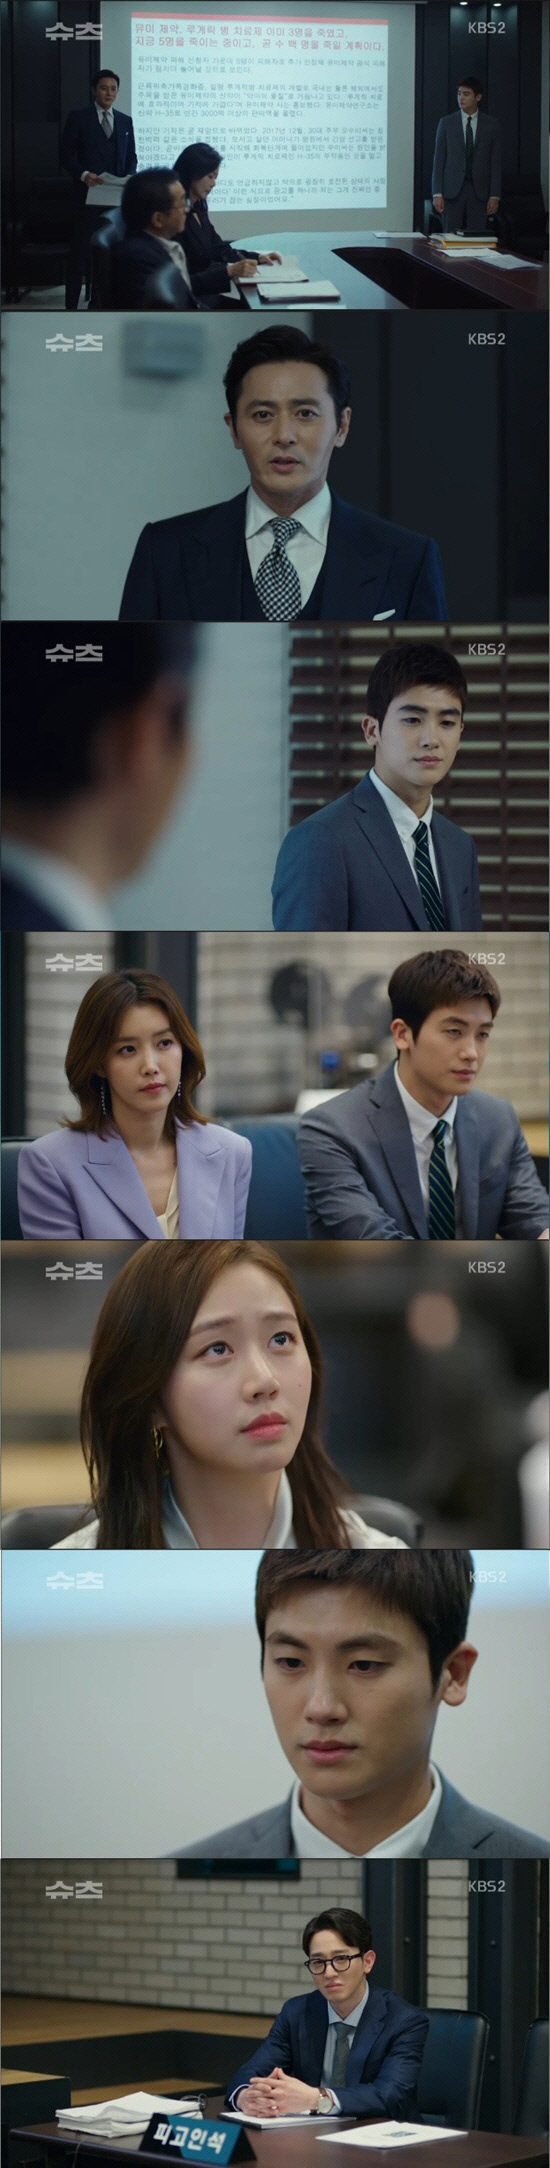 Park Hyung-sik loses out on Moot courtIn the 6th KBS 2TV drama  broadcast on the 10th, Miniforce Seok (Jang Dong-gun) finished Nokshi Chemical and Yumi Pharmaceutical.Meanwhile, Ko Yeon-woo (Park Hyung-sik) lost in the Moot court.On this day, Miniforce prepared a recording file obtained through Kang & Ham funds and Jay (Choi Yoo-hwa) in the match against lawyer David (Son Seok-gu) from Nokshi Chemical headquarters.This was a different way than the usual Miniforce seat, but the Miniforce seat was right. David signed the agreement and turned.Miniforce Seok heard from Kang Ha-yeon (Jin Hee-kyung) that Yumi Pharmaceutical CEO Kim also suffers from ALS.Miniforce Seok and Ko Yeon-woo asked Jeon Mi-ju, director of the U.S., to tell the truth to protect Kim (Nam Moon-chul).The director of the United States said he deliberately missed patients with abnormalities during clinical trials.Miniforce said that Kim Dae-pyo is also battling ALS in front of Yumi Pharmaceuticals new drug Victims and a lawyer.Instead, he offered to give the companys ownership stake to Victims. Chang, who heard the story, was furious.Kang Ha-yeon told Victims that Kim also suffers from ALS, adding that Kim should continue his research and give him an opportunity to make up for his mistakes rather than stopping drug development due to bankruptcy.The Victims accepted the meaning.Ko Yeon-woo (Park Hyung-sik) asked Se-hee (Lee Si-won) for help and prepared for the mot court; Se-hee appeared in the mot court as a witness.Ji-na Kim (Ko Sung-hee) stepped up as a client on the west side who faced Ko Yeon-woo.Ko pushed Ji-na Kim, who burst into tears with excitement when Ko touched her test phobia.Ko could not see Ji-na Kim like that. Kang Hae-yeon, who played the role of judge, declared a victory for the west.Ko dropped his head. Miniforce saw Kos loss and his expression was distorted.